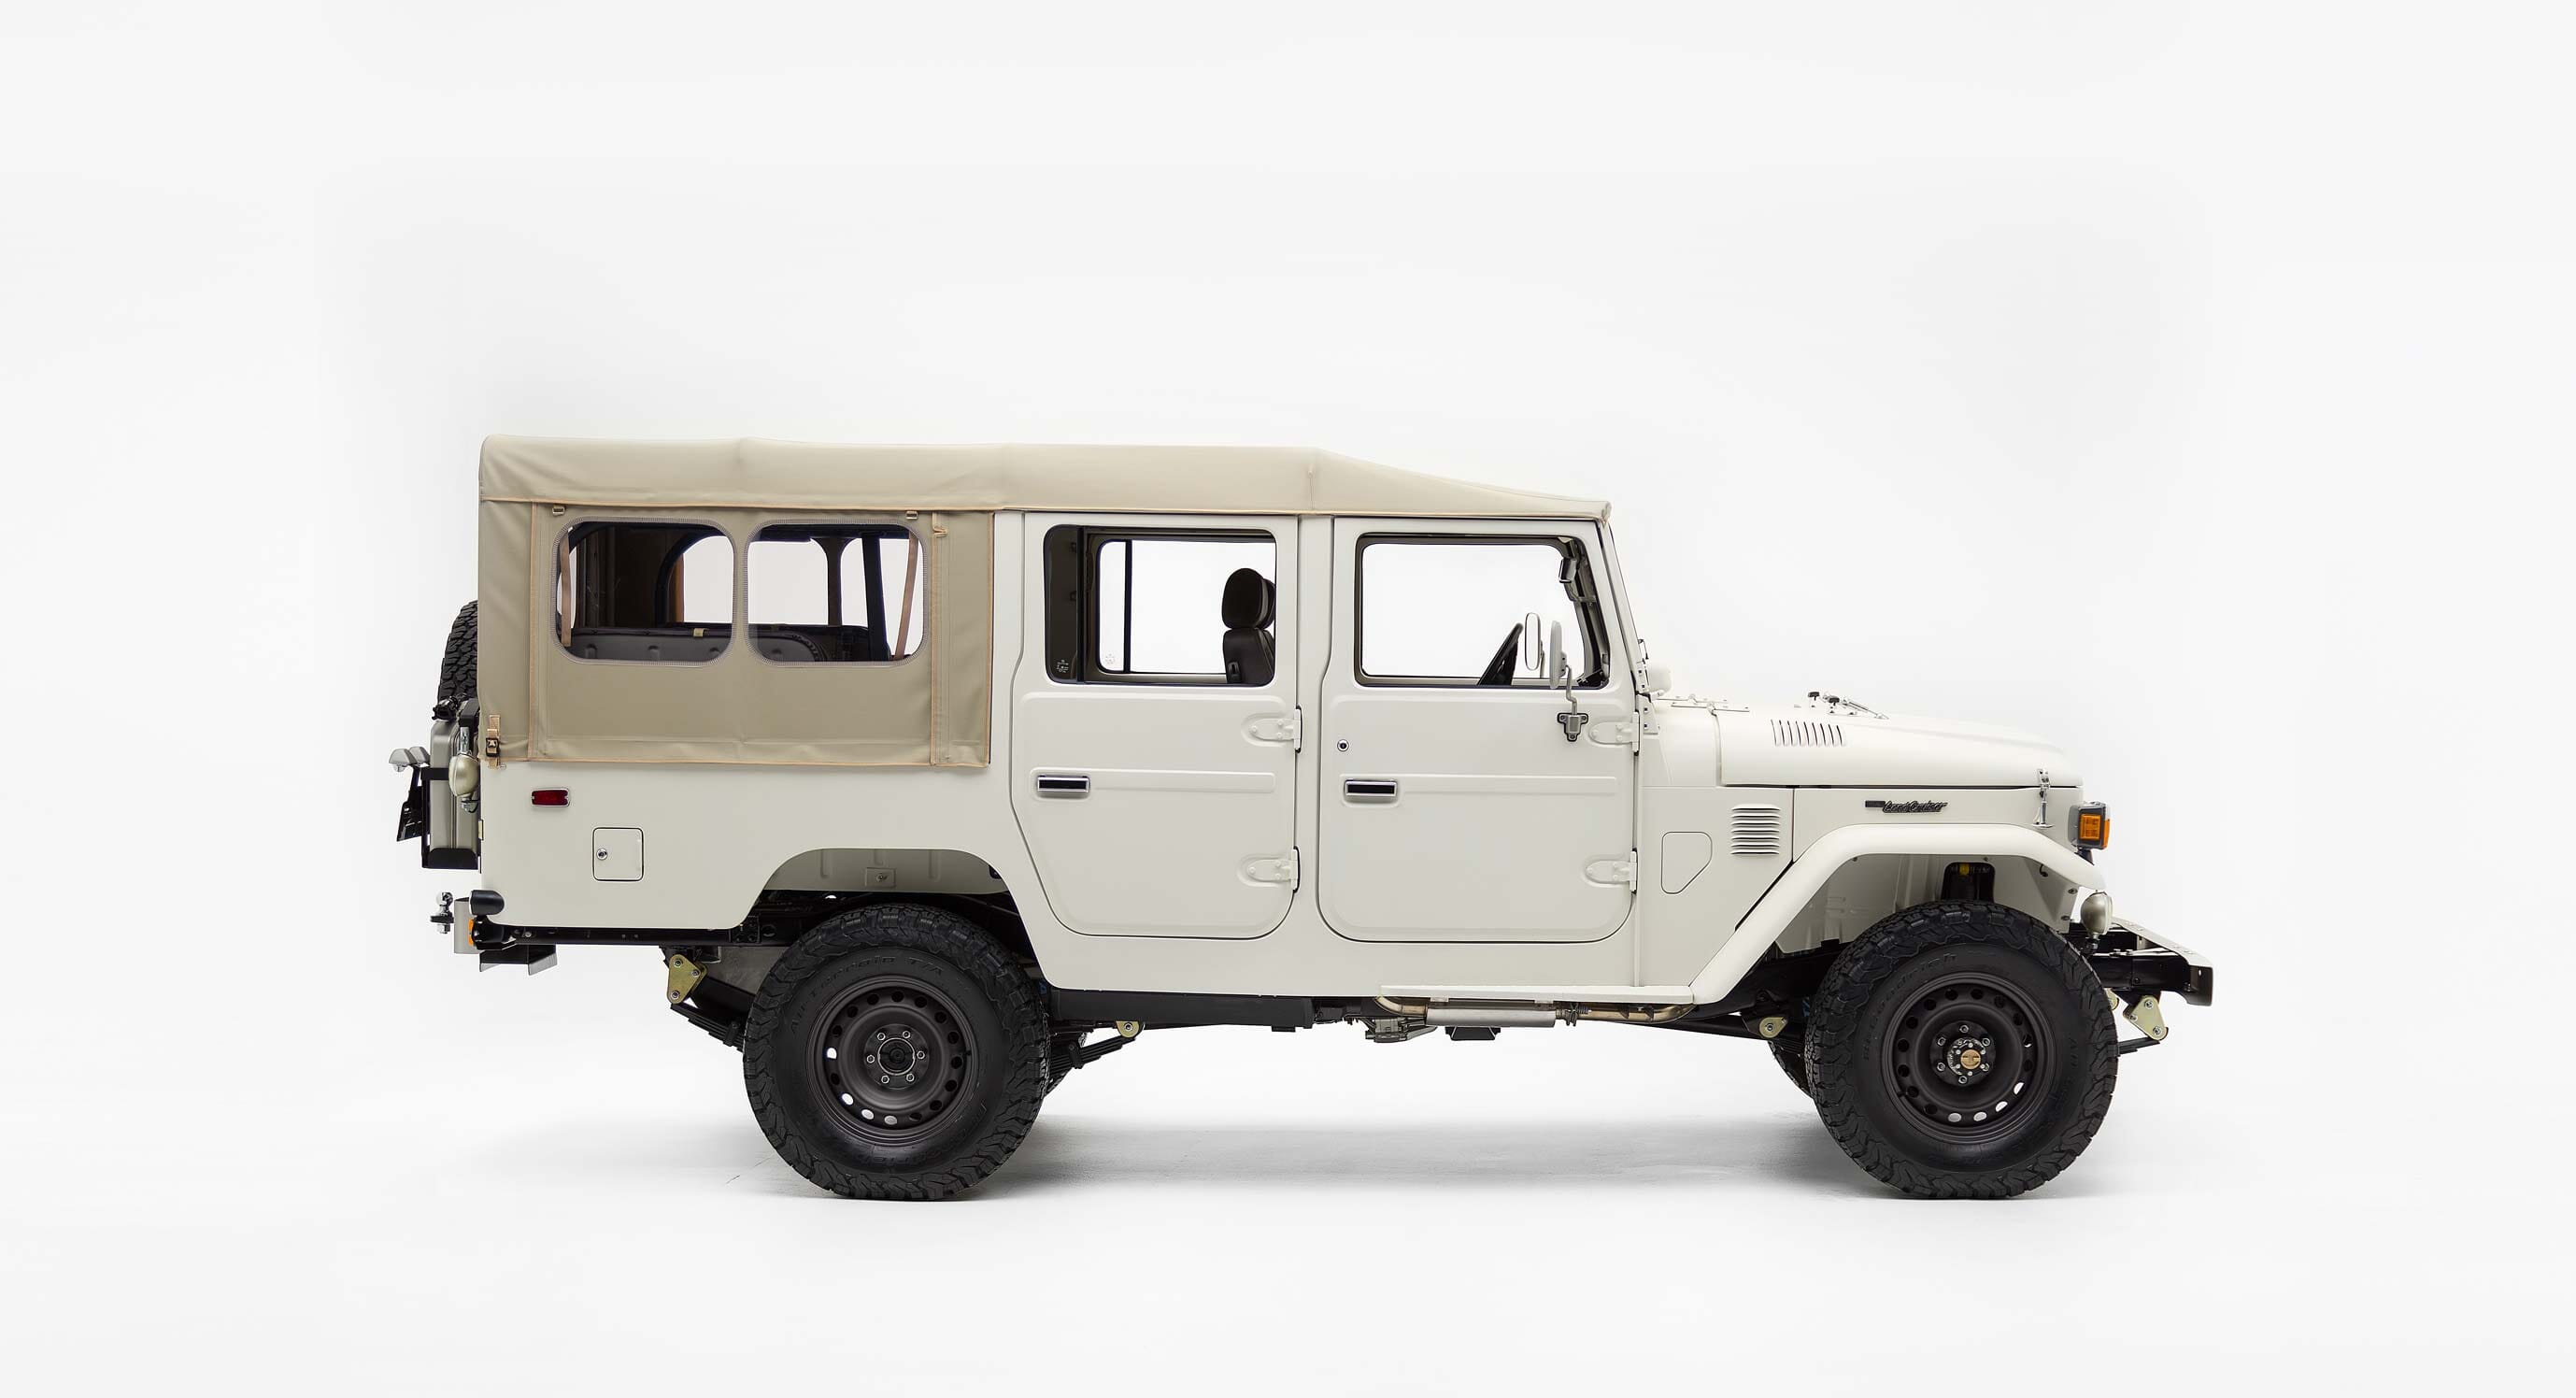 The FJ Company builds Land Cruisers with passion